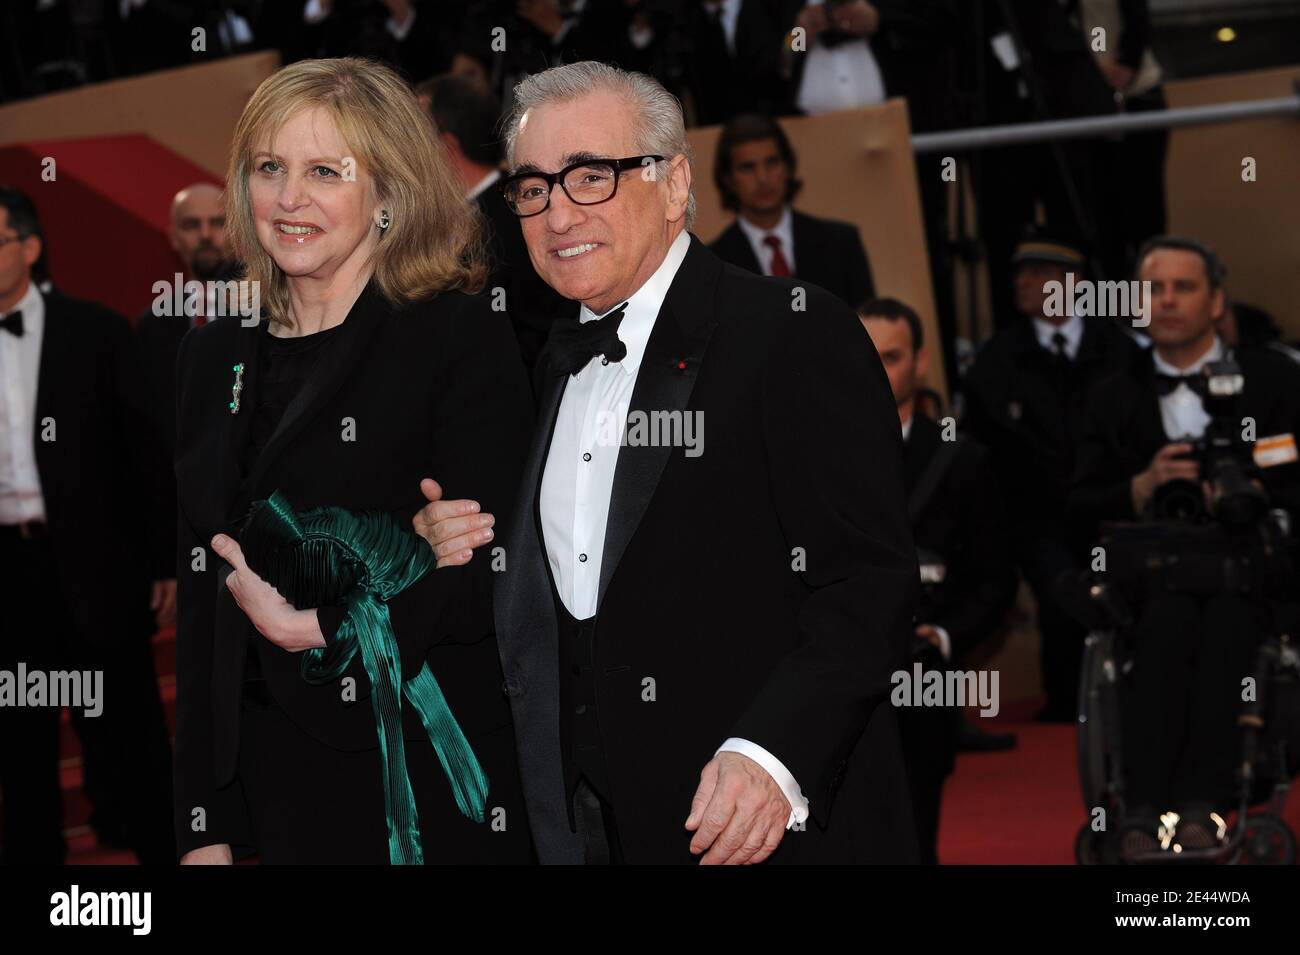 Helen Morris ans Martin Scorsese arriving to the screening of 'Bright Star' during the 62nd Cannes Film Festival at the Palais des Festivals in Cannes, France on May 15, 2009. Photo by Nebinger-Orban/ABACAPRESS.COM Local Caption 187682 042 Local Caption 187682 042 Stock Photo